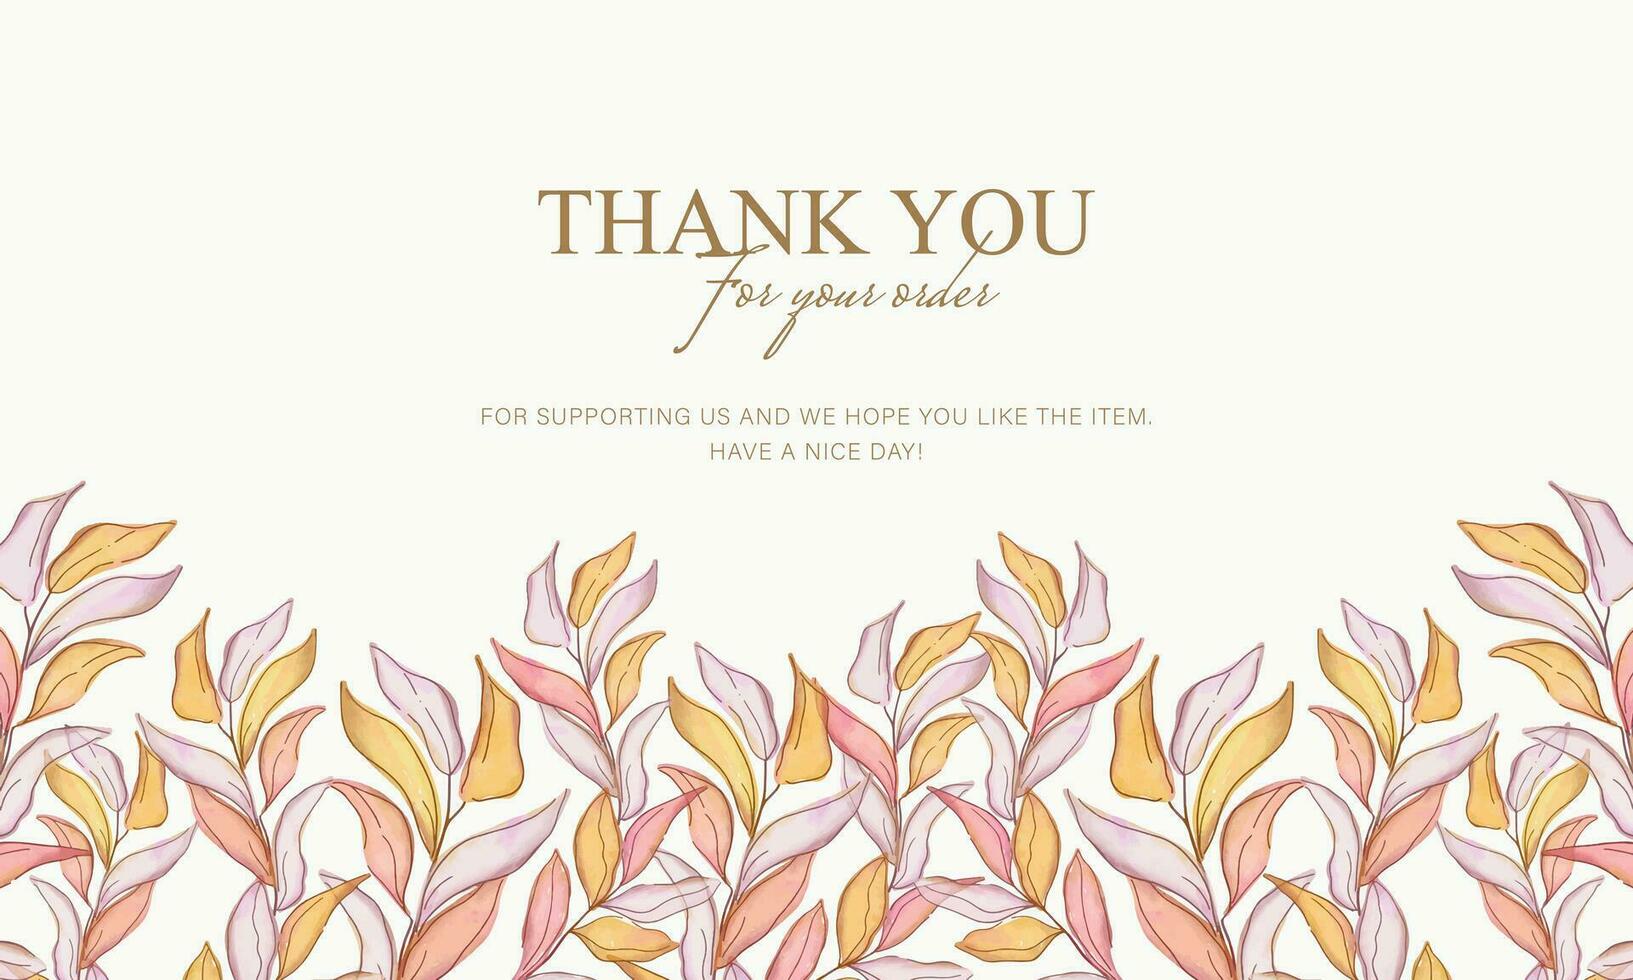 thank you card. greeting card with colorful floral background vector